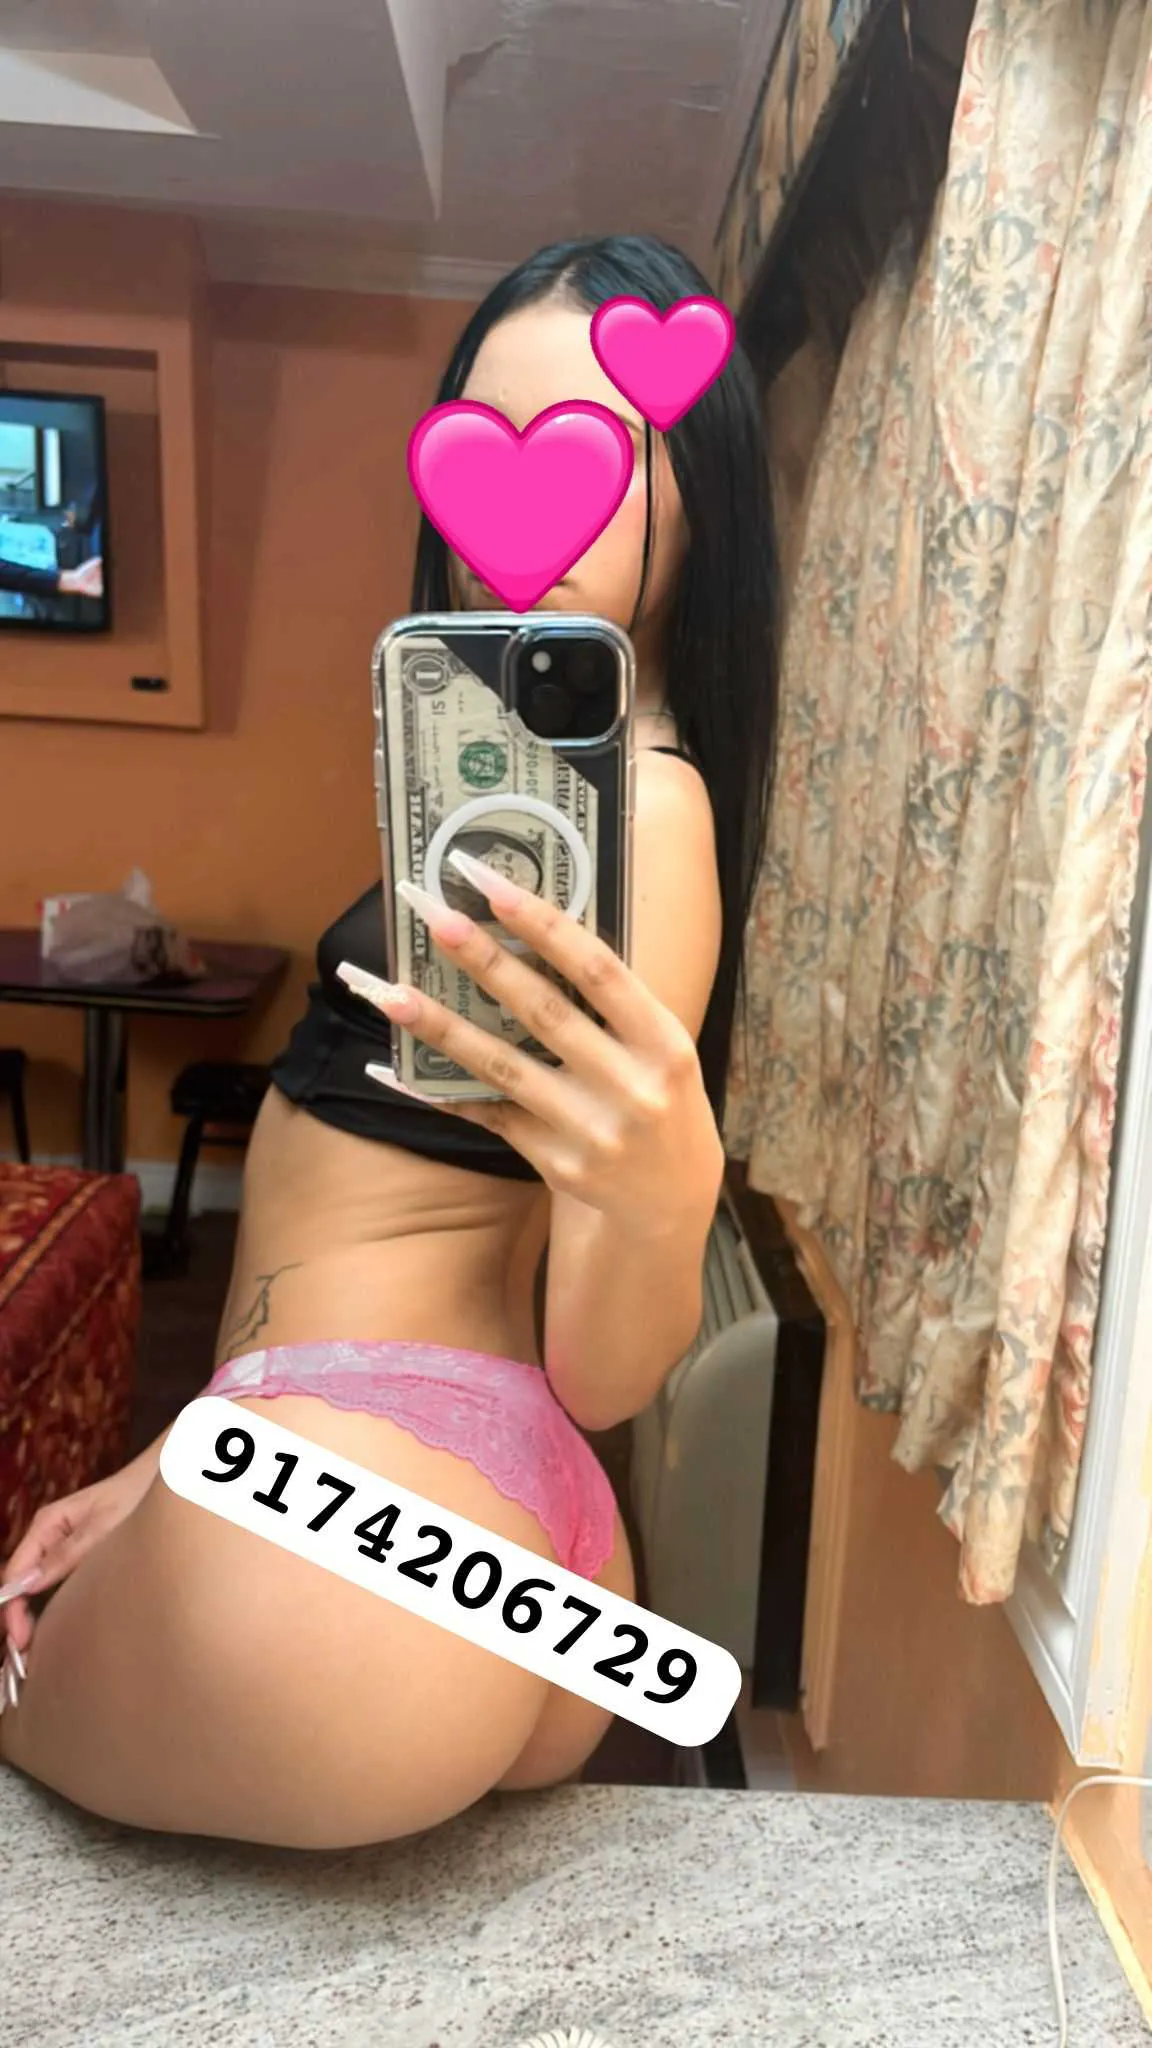 Reviews about escort with phone number 9174206729